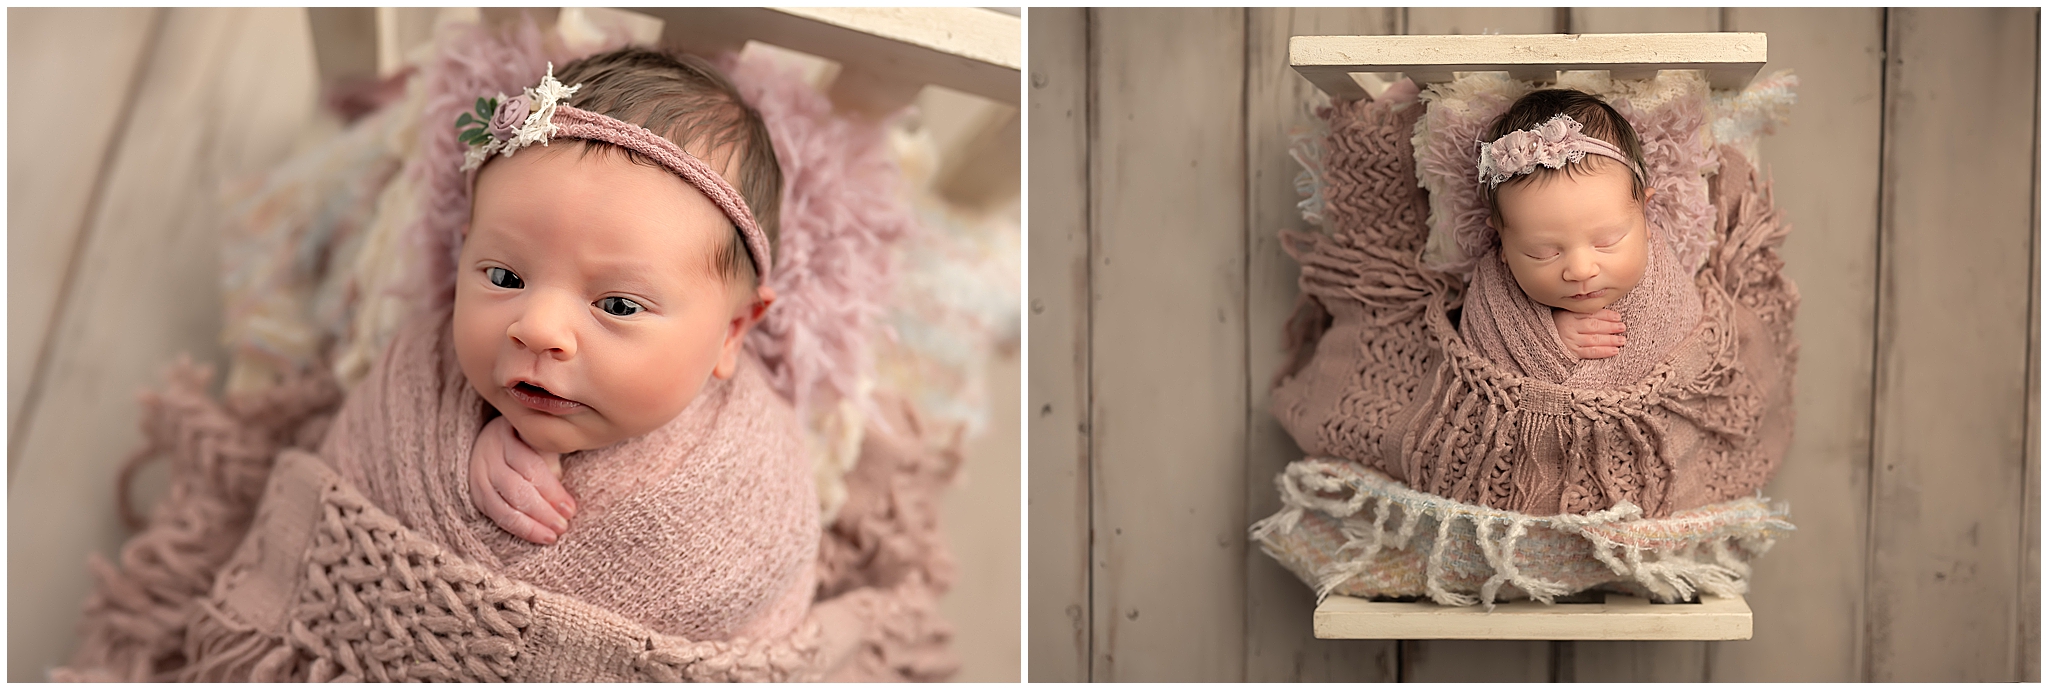 newborn baby girl sleeping in tiny bed during photography session in london ontario